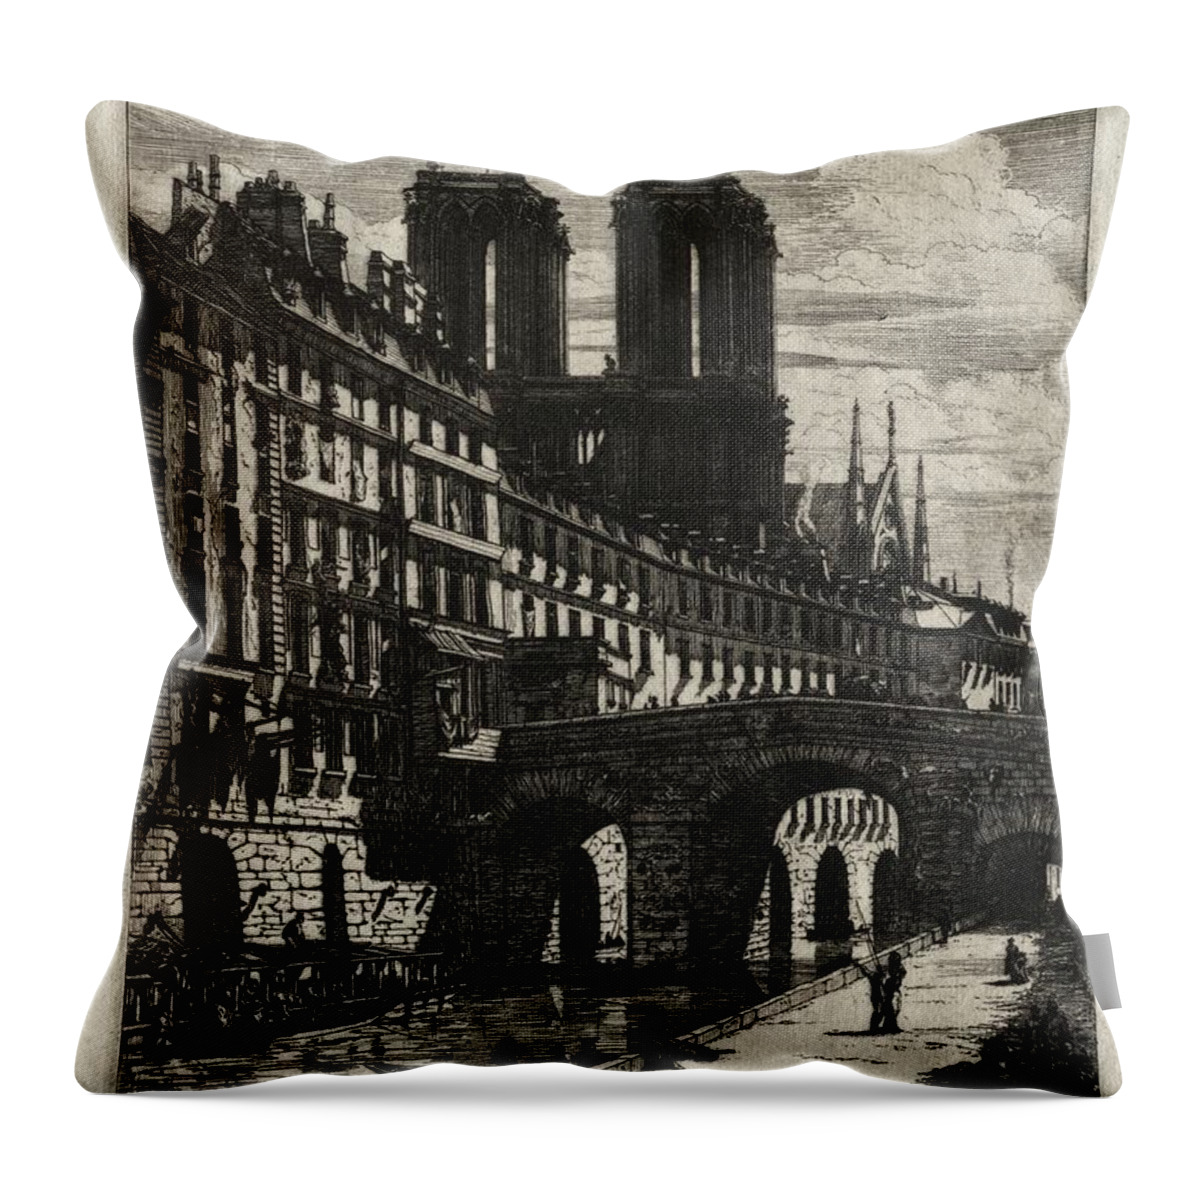 Etchings Of Paris Le Petit Pont 1850 Charles Meryon Etching Throw Pillow featuring the painting Etchings of Paris Le Petit Pont 1850 Charles Meryon by MotionAge Designs